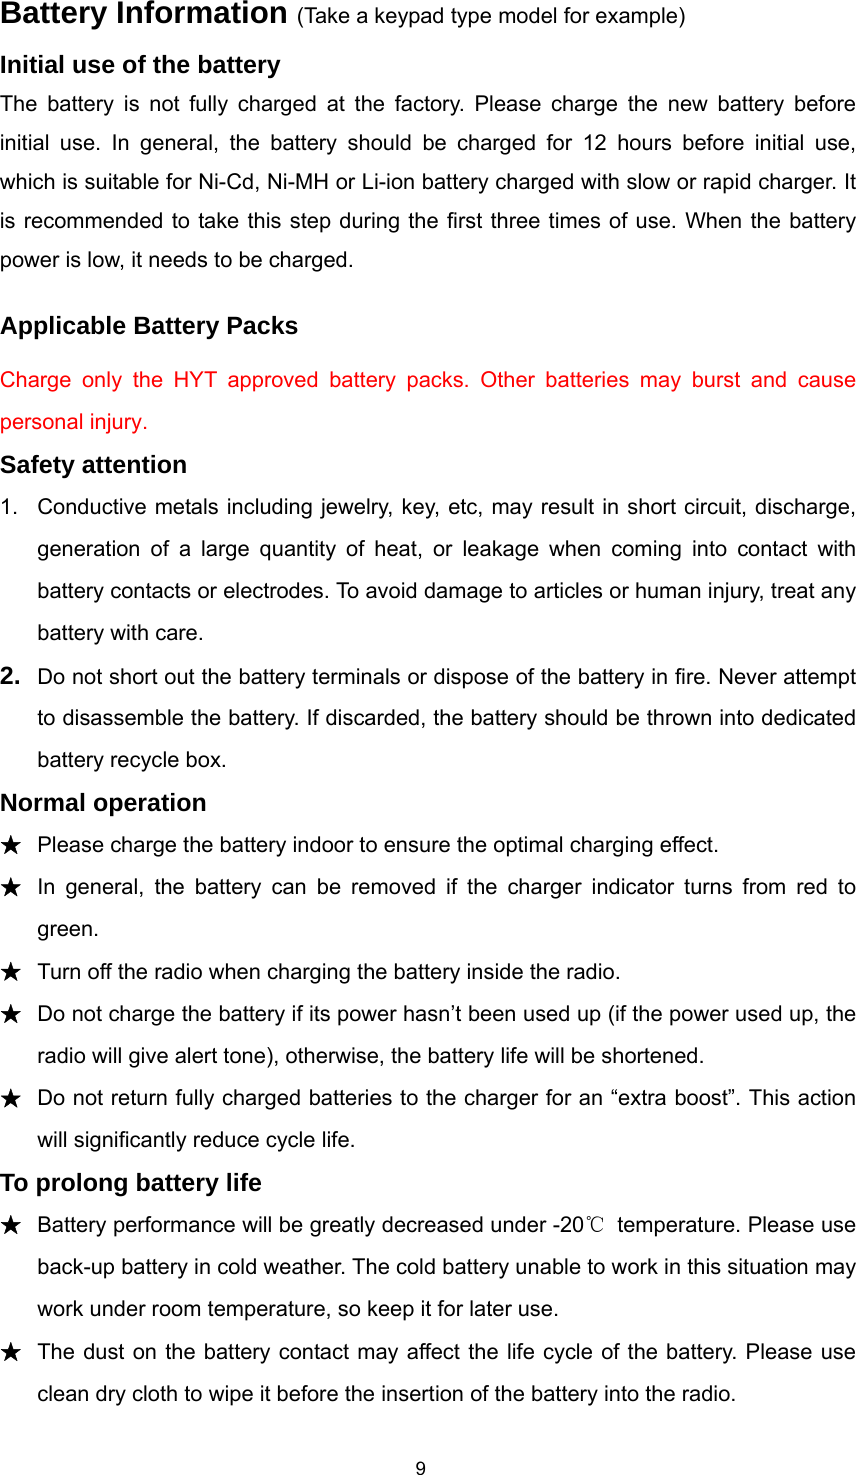  9Battery Information (Take a keypad type model for example) Initial use of the battery The battery is not fully charged at the factory. Please charge the new battery before initial use. In general, the battery should be charged for 12 hours before initial use, which is suitable for Ni-Cd, Ni-MH or Li-ion battery charged with slow or rapid charger. It is recommended to take this step during the first three times of use. When the battery power is low, it needs to be charged. Applicable Battery Packs Charge only the HYT approved battery packs. Other batteries may burst and cause personal injury. Safety attention 1.  Conductive metals including jewelry, key, etc, may result in short circuit, discharge, generation of a large quantity of heat, or leakage when coming into contact with battery contacts or electrodes. To avoid damage to articles or human injury, treat any battery with care. 2.  Do not short out the battery terminals or dispose of the battery in fire. Never attempt to disassemble the battery. If discarded, the battery should be thrown into dedicated battery recycle box. Normal operation ★ Please charge the battery indoor to ensure the optimal charging effect. ★ In general, the battery can be removed if the charger indicator turns from red to green. ★ Turn off the radio when charging the battery inside the radio. ★ Do not charge the battery if its power hasn’t been used up (if the power used up, the radio will give alert tone), otherwise, the battery life will be shortened. ★ Do not return fully charged batteries to the charger for an “extra boost”. This action will significantly reduce cycle life.   To prolong battery life ★ Battery performance will be greatly decreased under -20℃  temperature. Please use back-up battery in cold weather. The cold battery unable to work in this situation may work under room temperature, so keep it for later use.   ★ The dust on the battery contact may affect the life cycle of the battery. Please use clean dry cloth to wipe it before the insertion of the battery into the radio.   